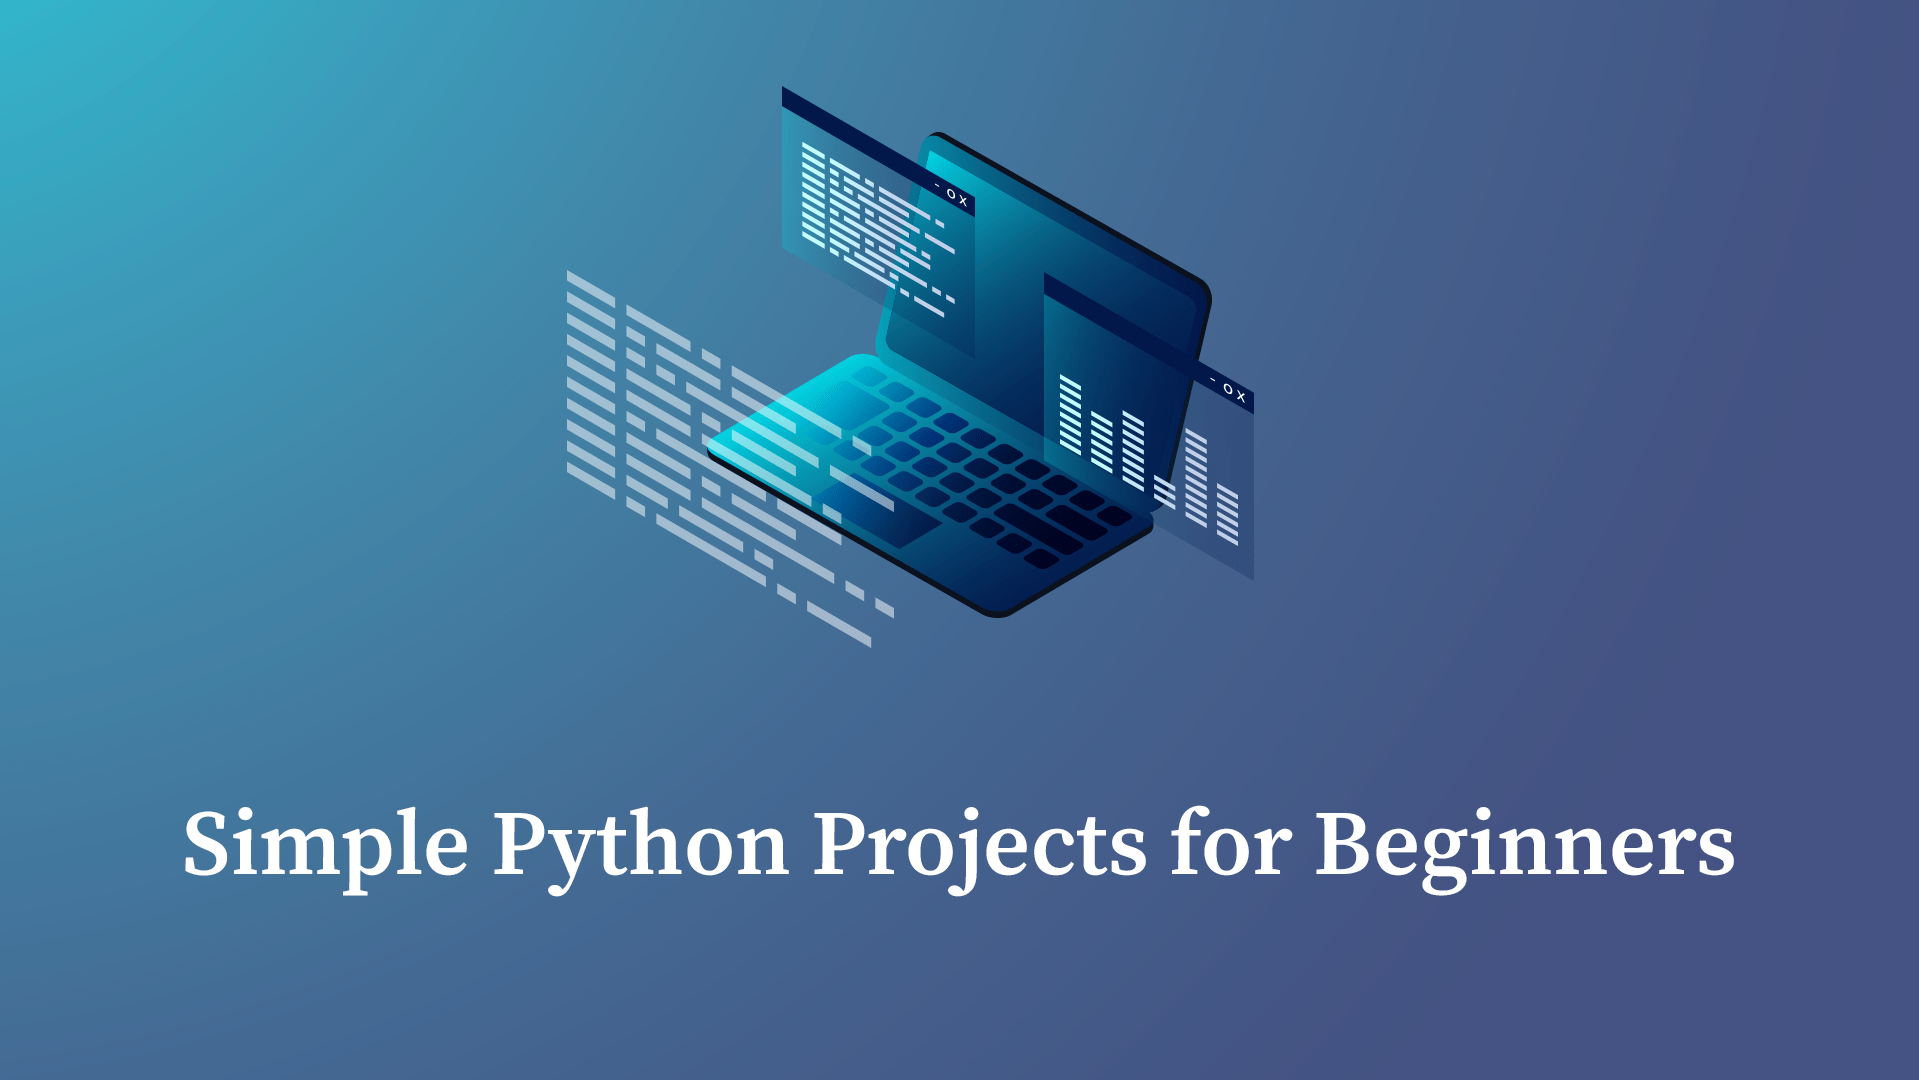 Simple Python Projects for Beginners